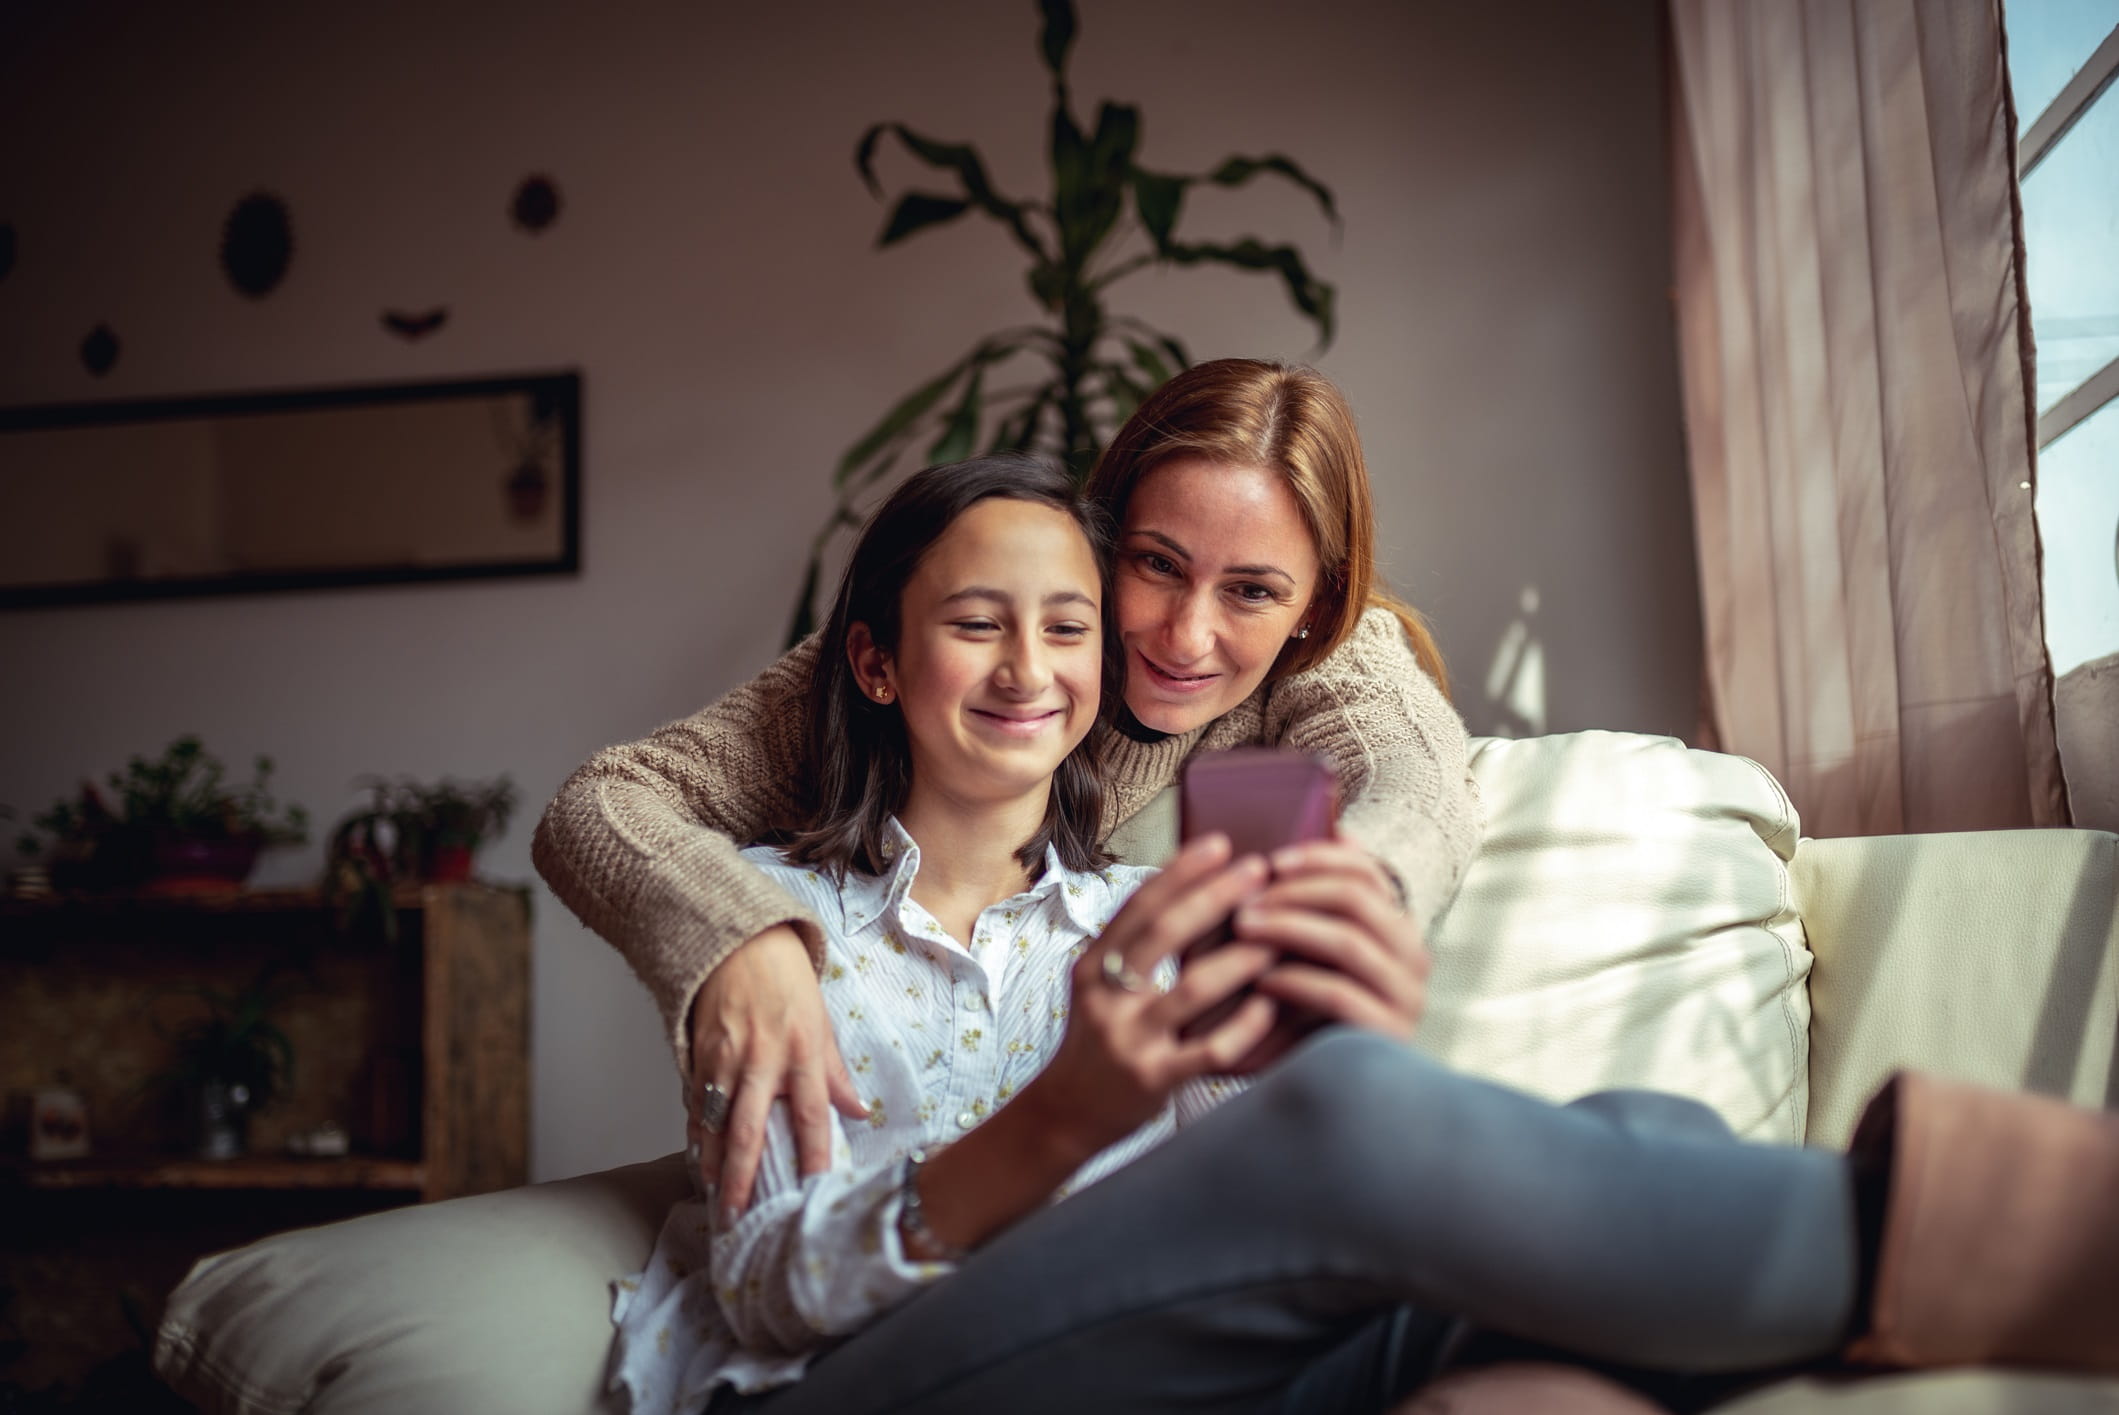 Teenage girl using a smartphone and smiling as mom gives her a hug